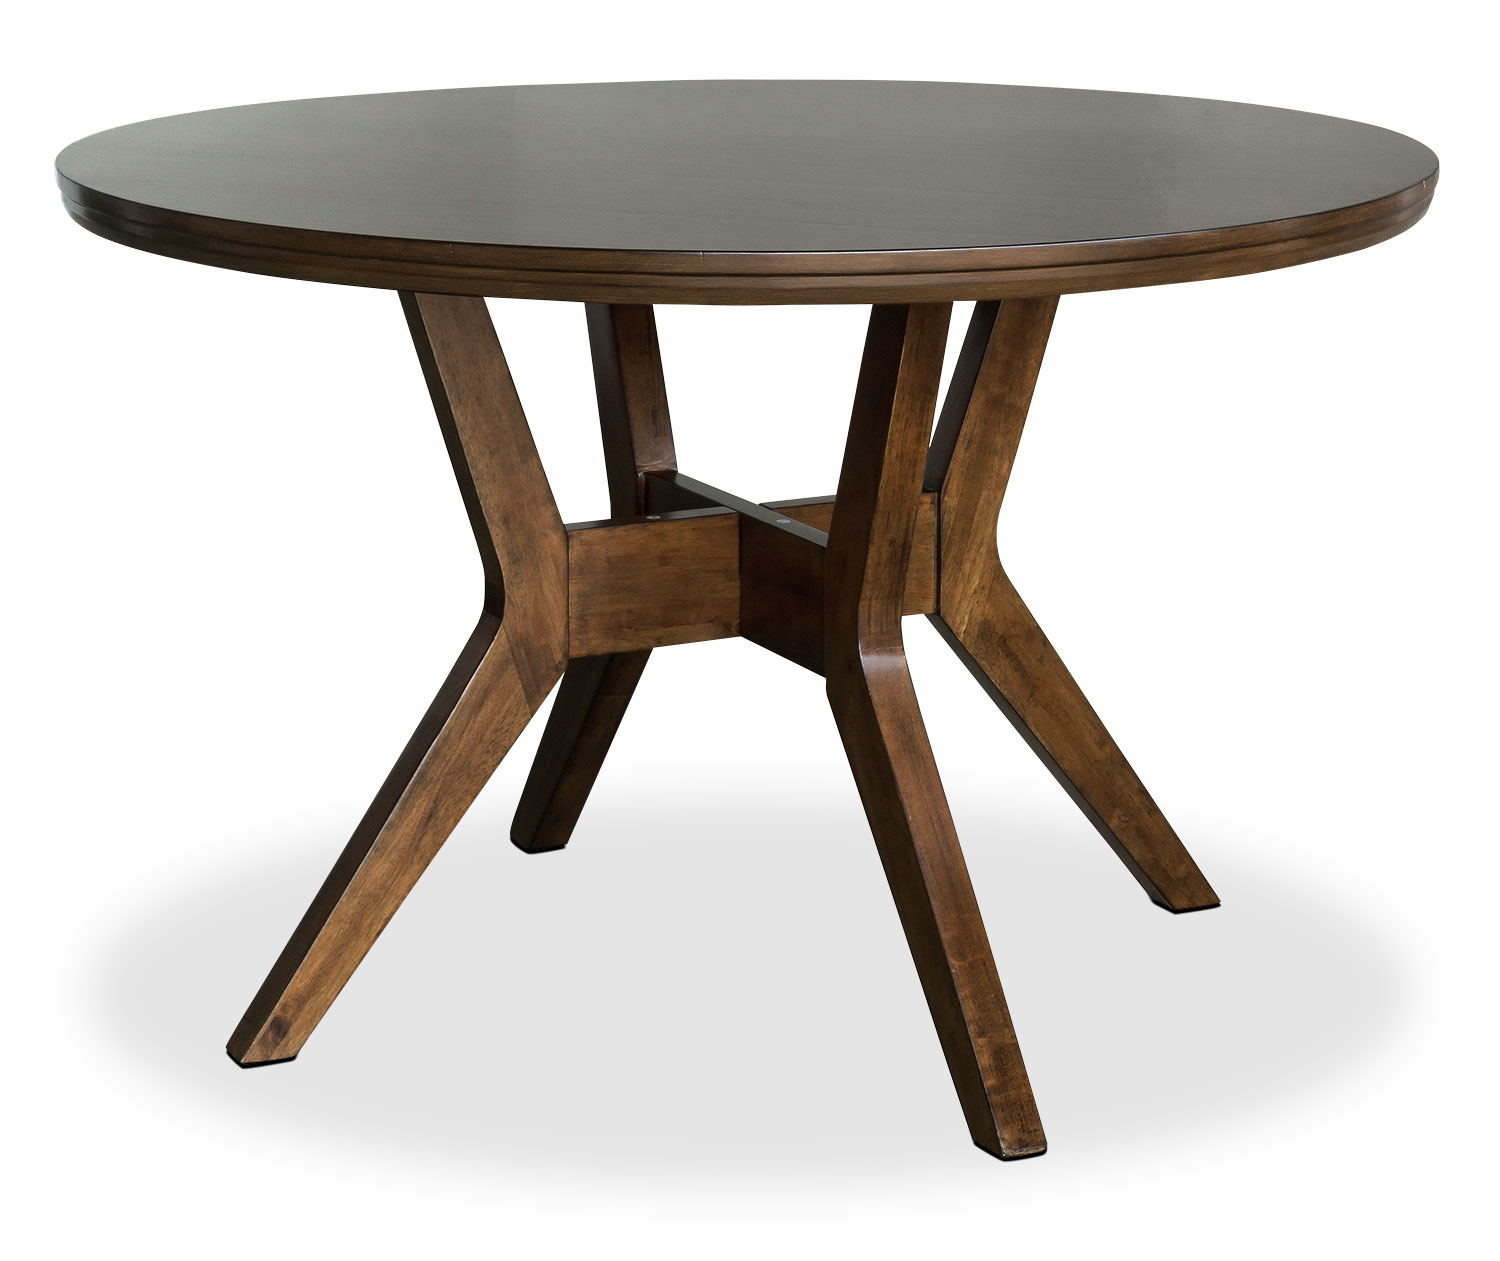 Chelsea Round Dining Table | The Brick
